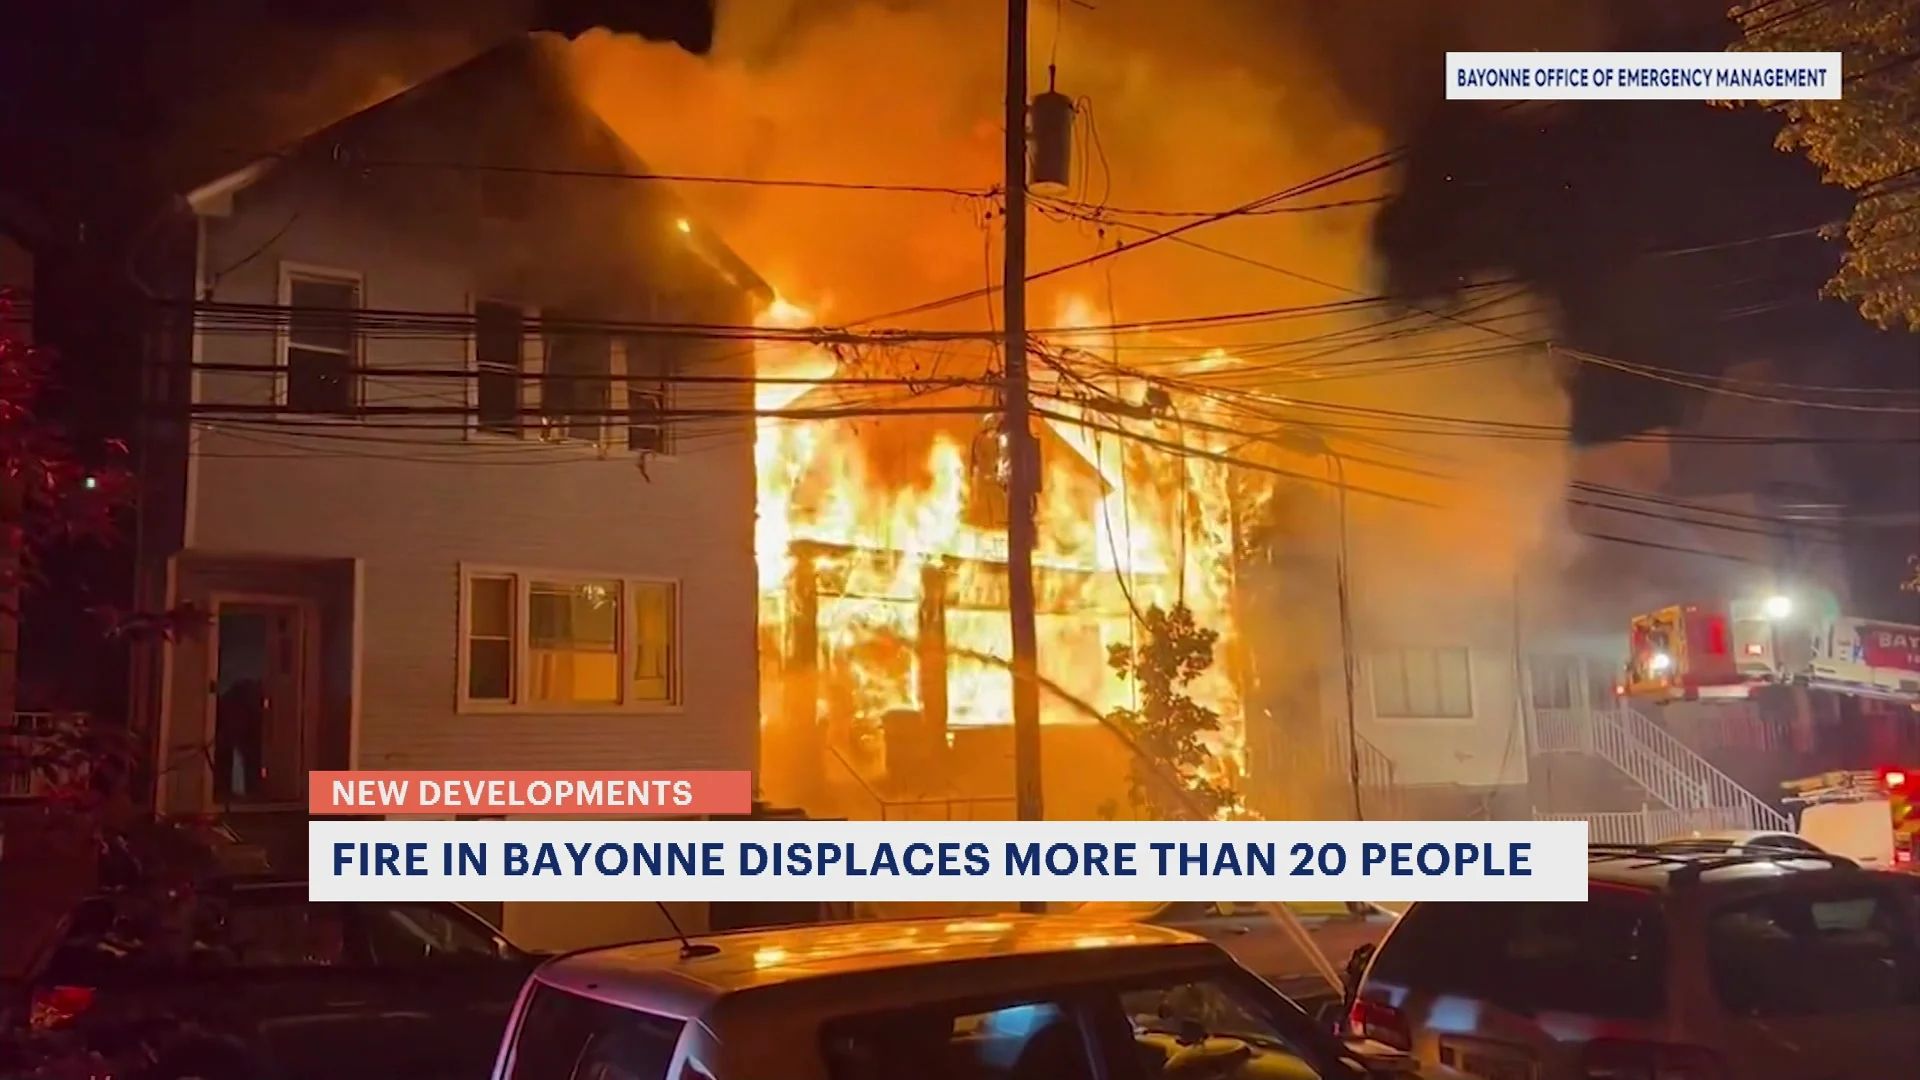 Officials: 3 homes torn down following fast-moving fire in Bayonne; 20+ displaced